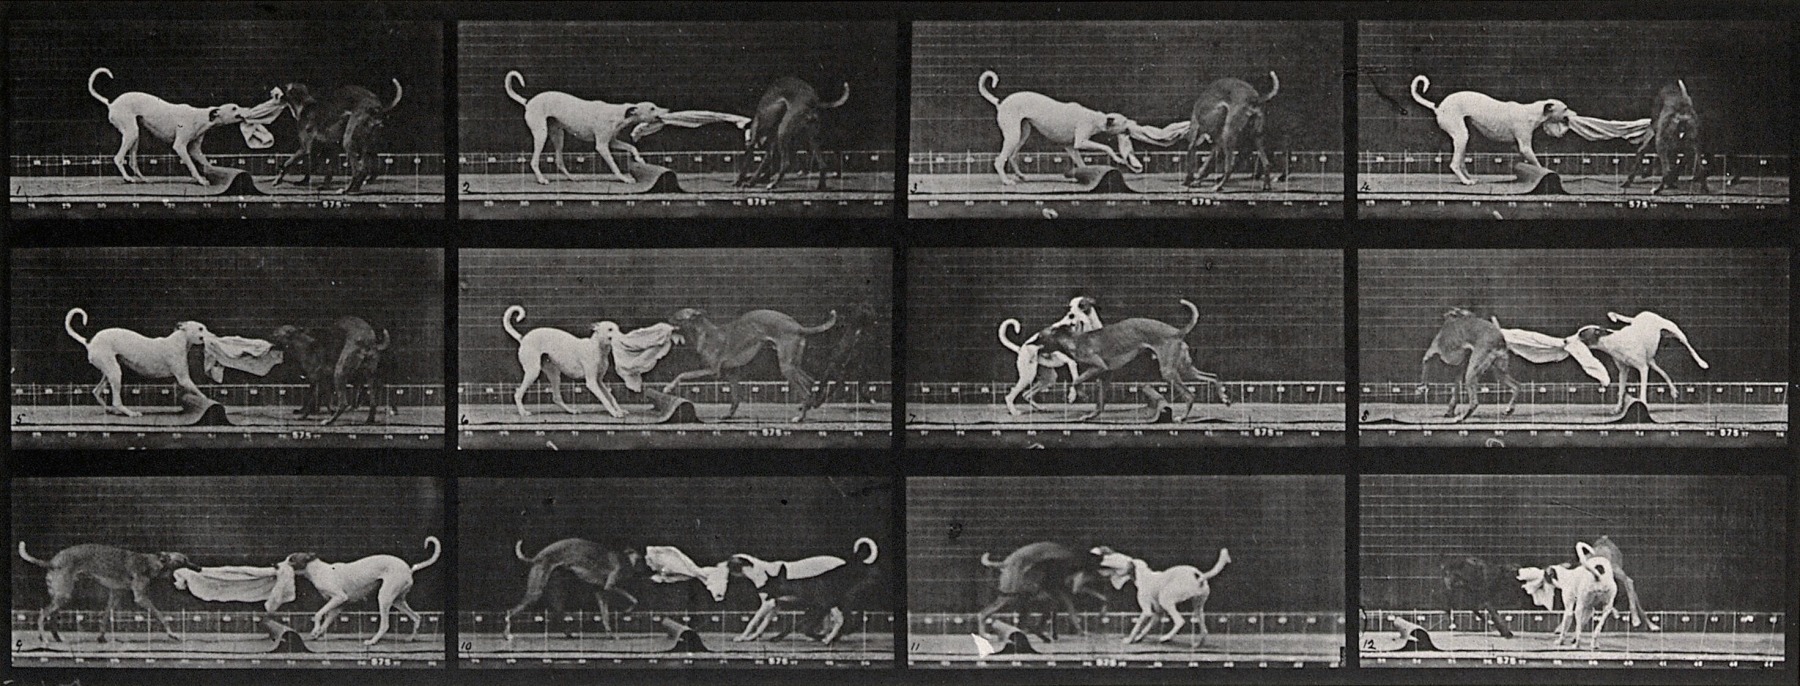 Sequence of black and white photos showing the movements of three dogs tugging on a towel